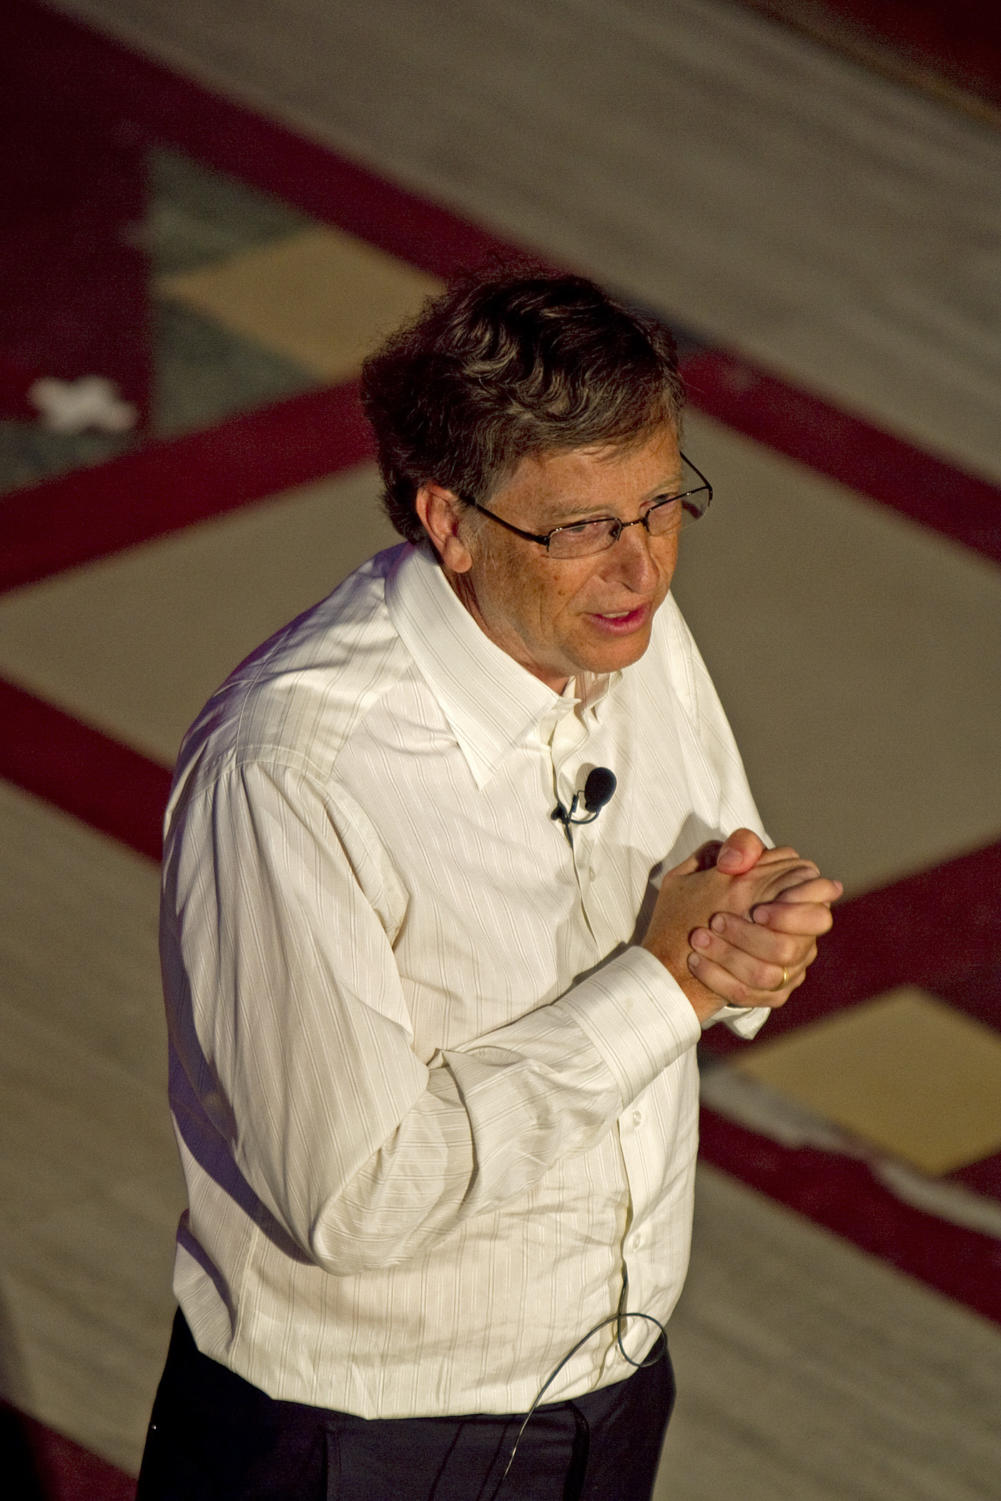 Bill Gates spoke about some of the world's most important problems last Tuesday night at Rockefeller Chapel. The University of Chicago was his first stop on his College Tour 2010.